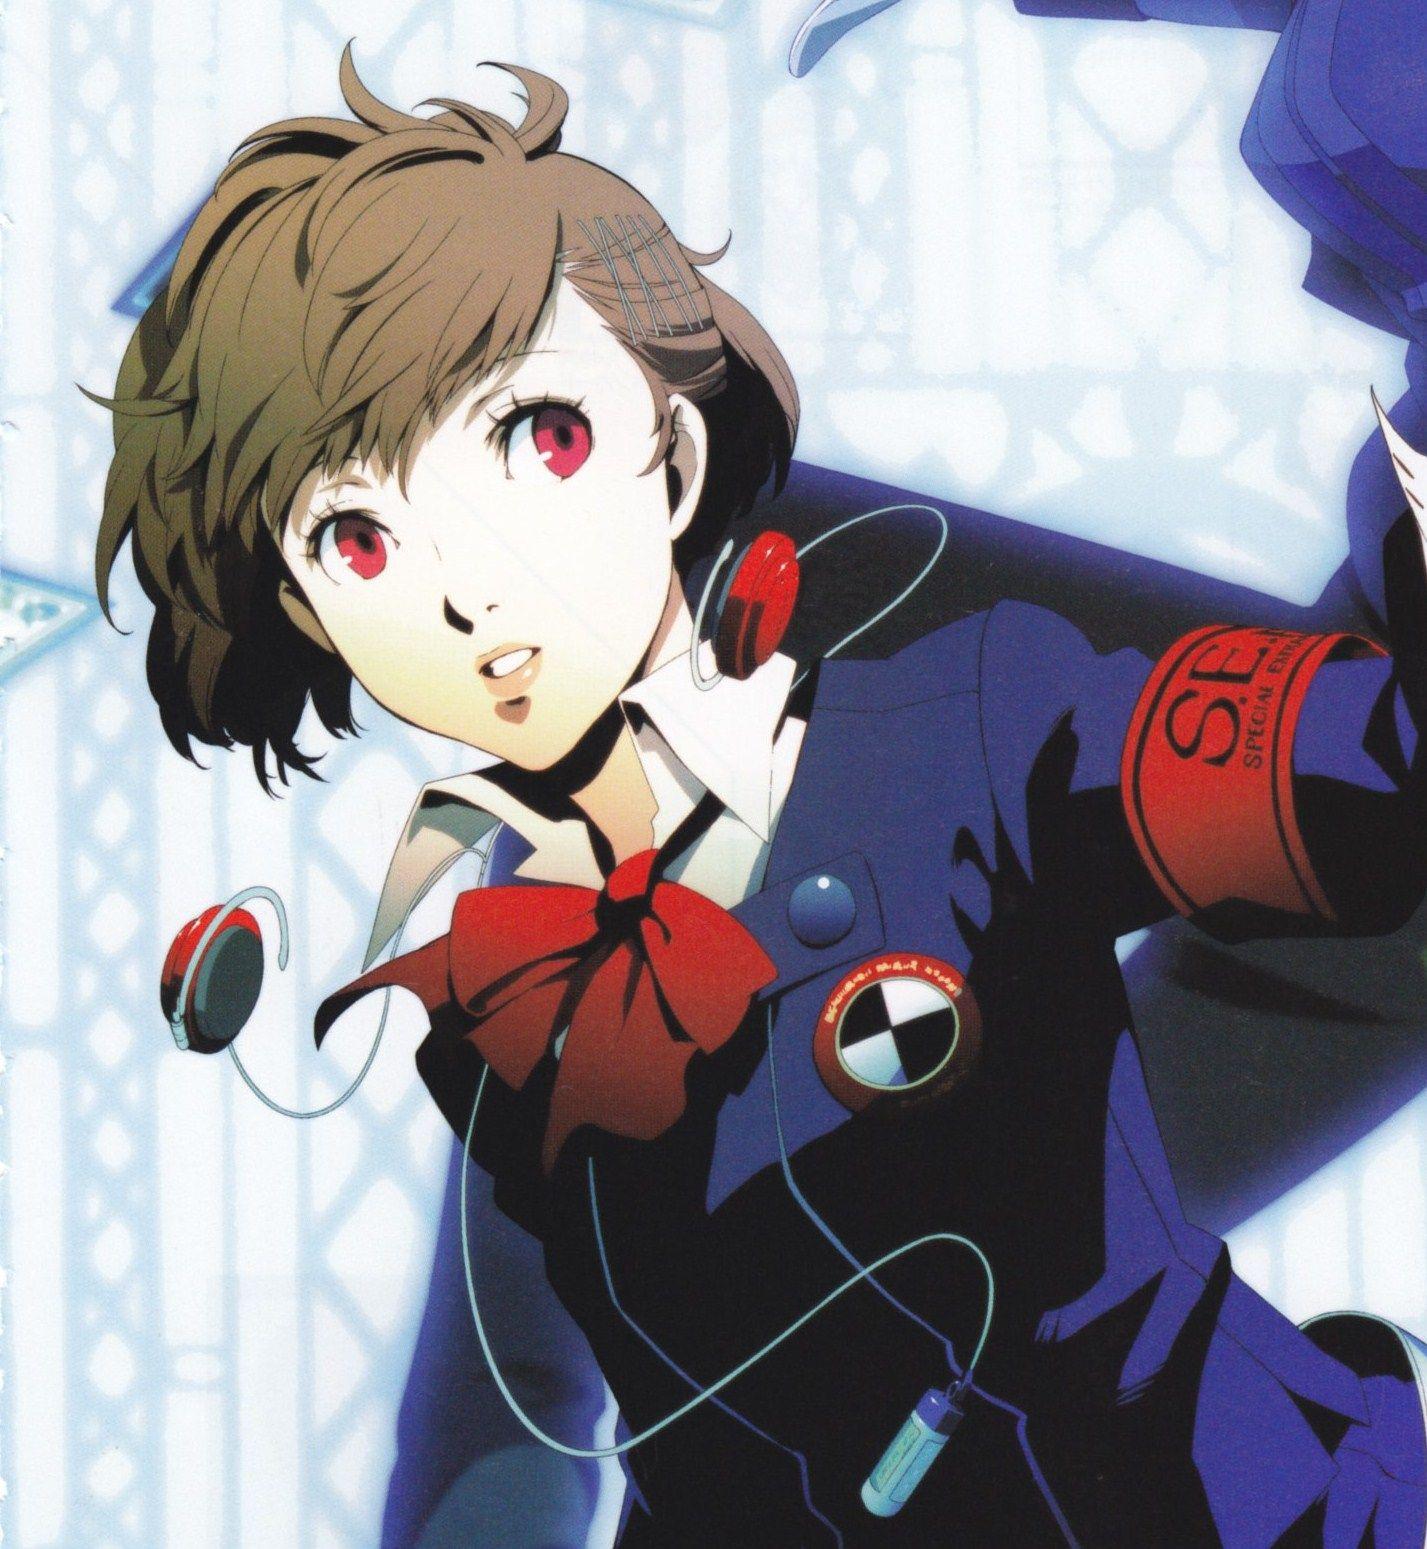 Persona 3 Portable Female Protagonist (Character)